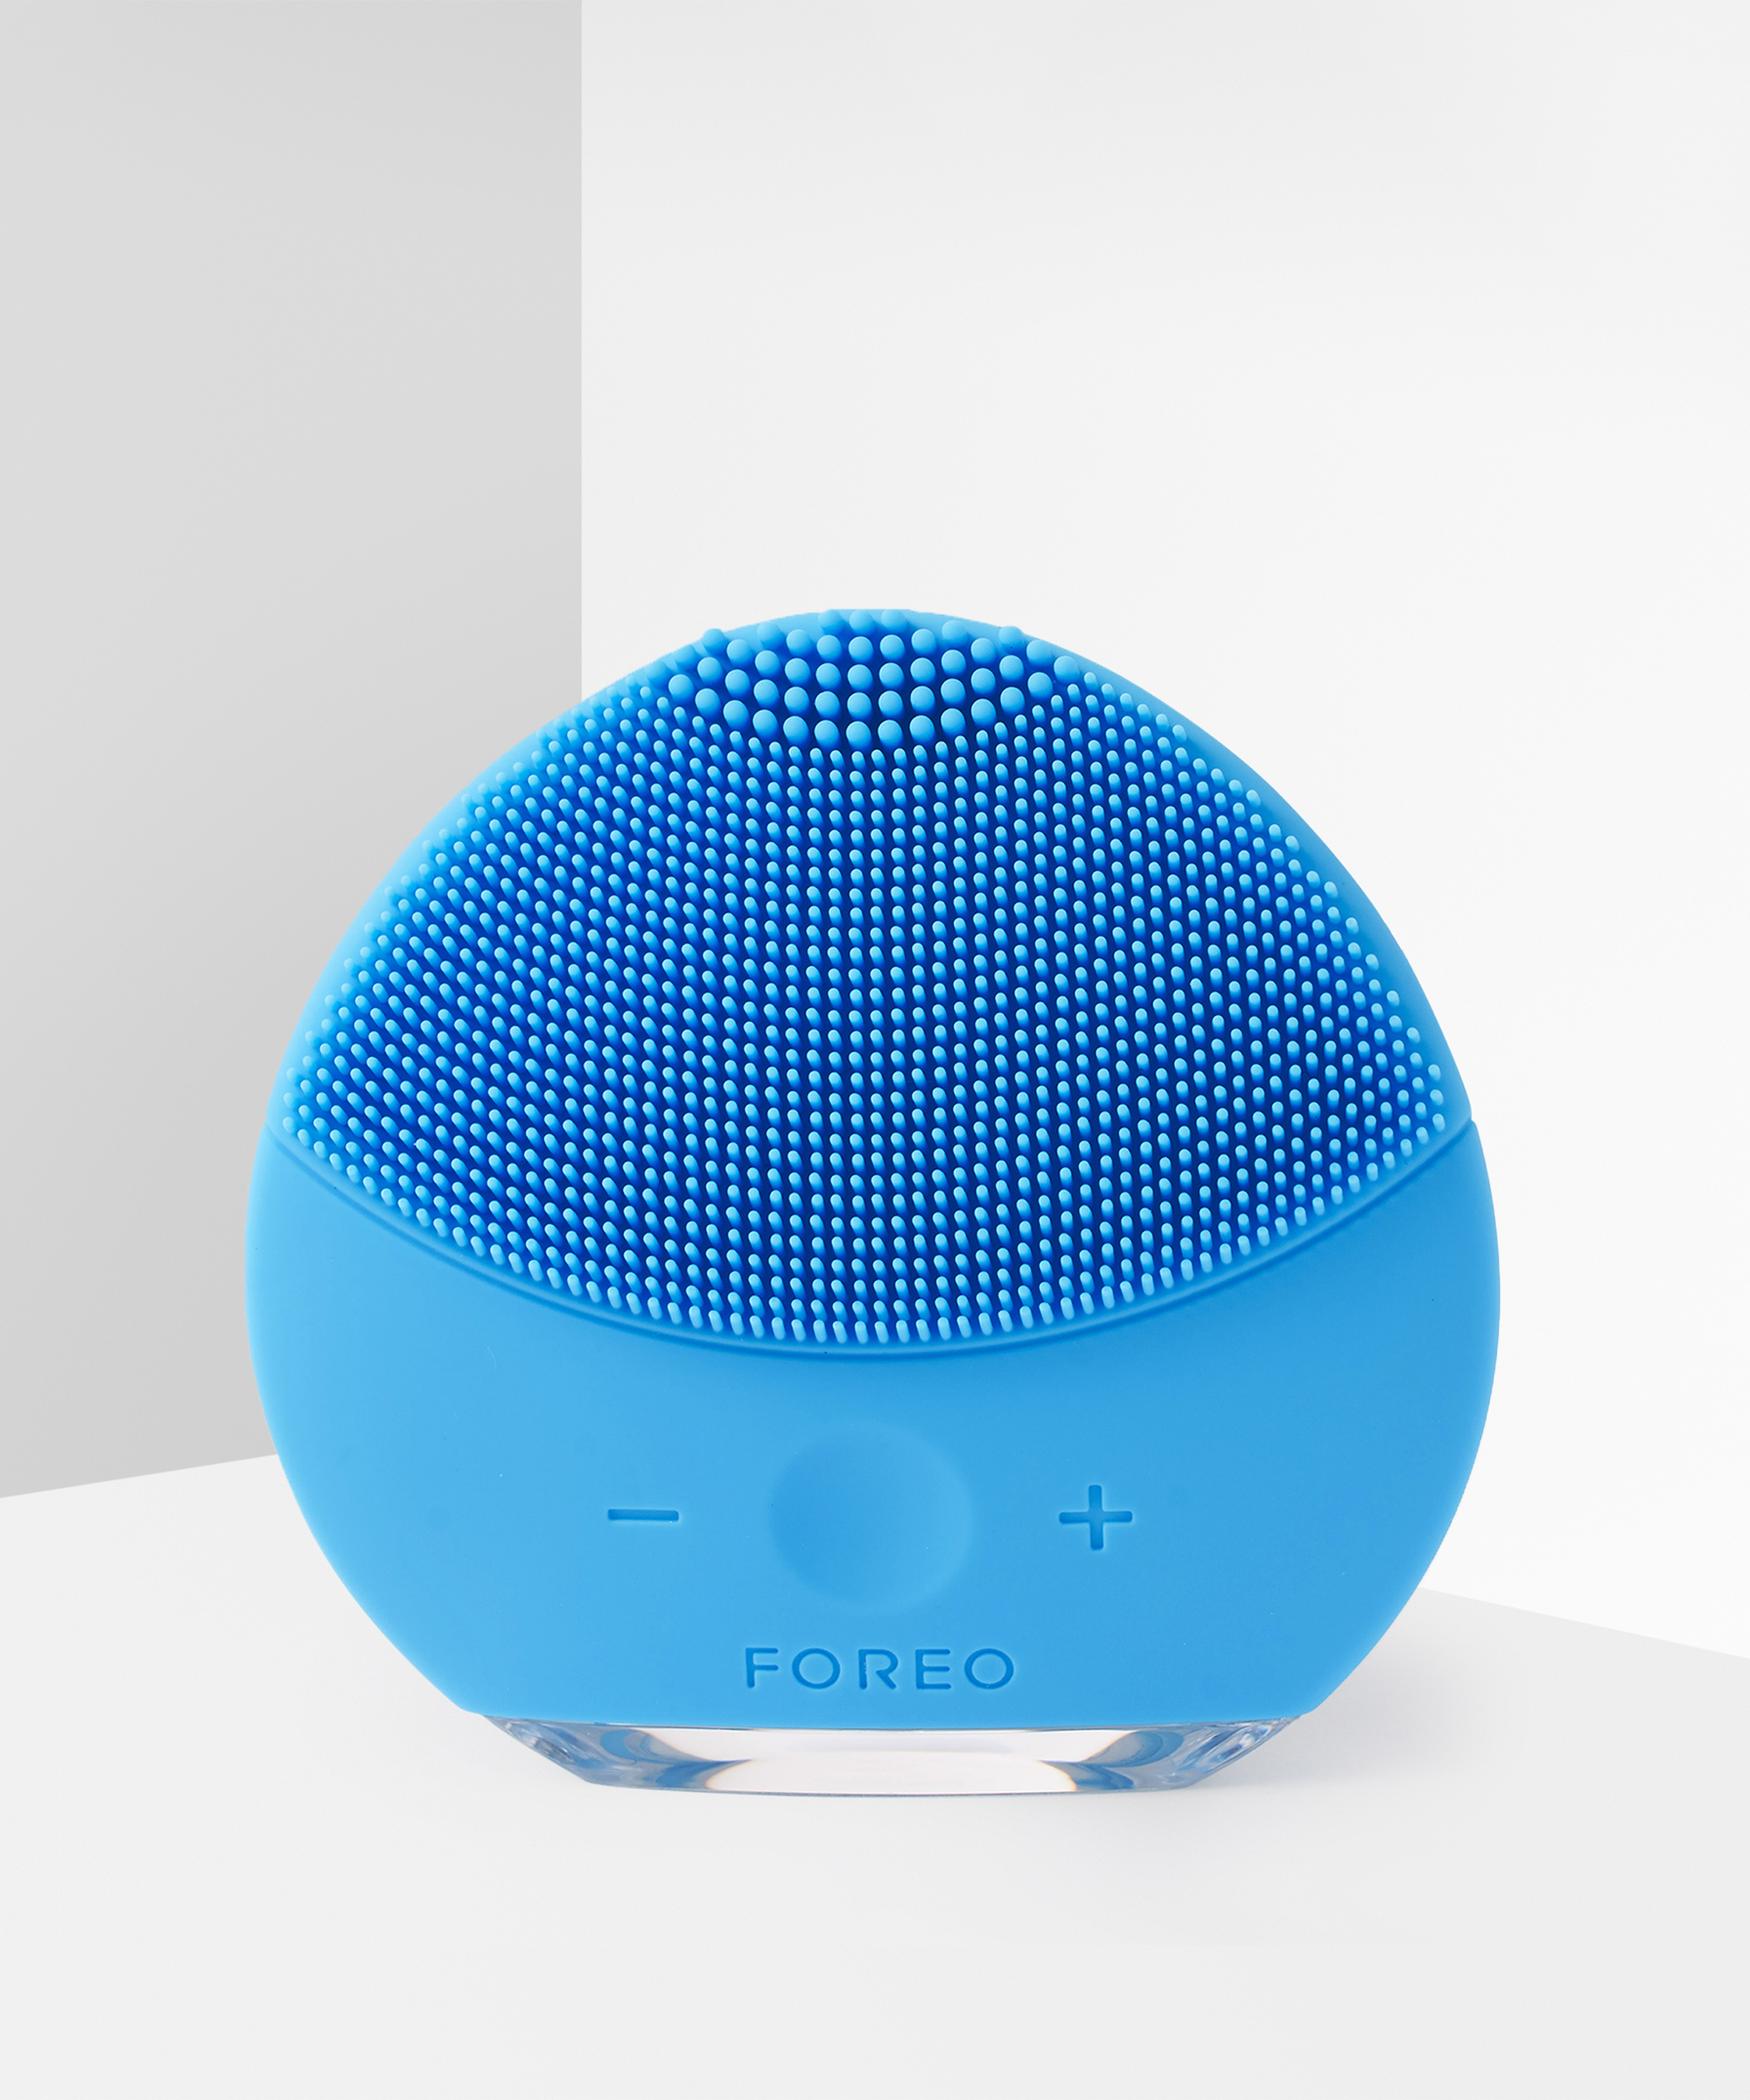 BAY All BEAUTY at Dual-Sided Types Brush Foreo For LUNA™ Skin Mini 2 Face - Aquamarine